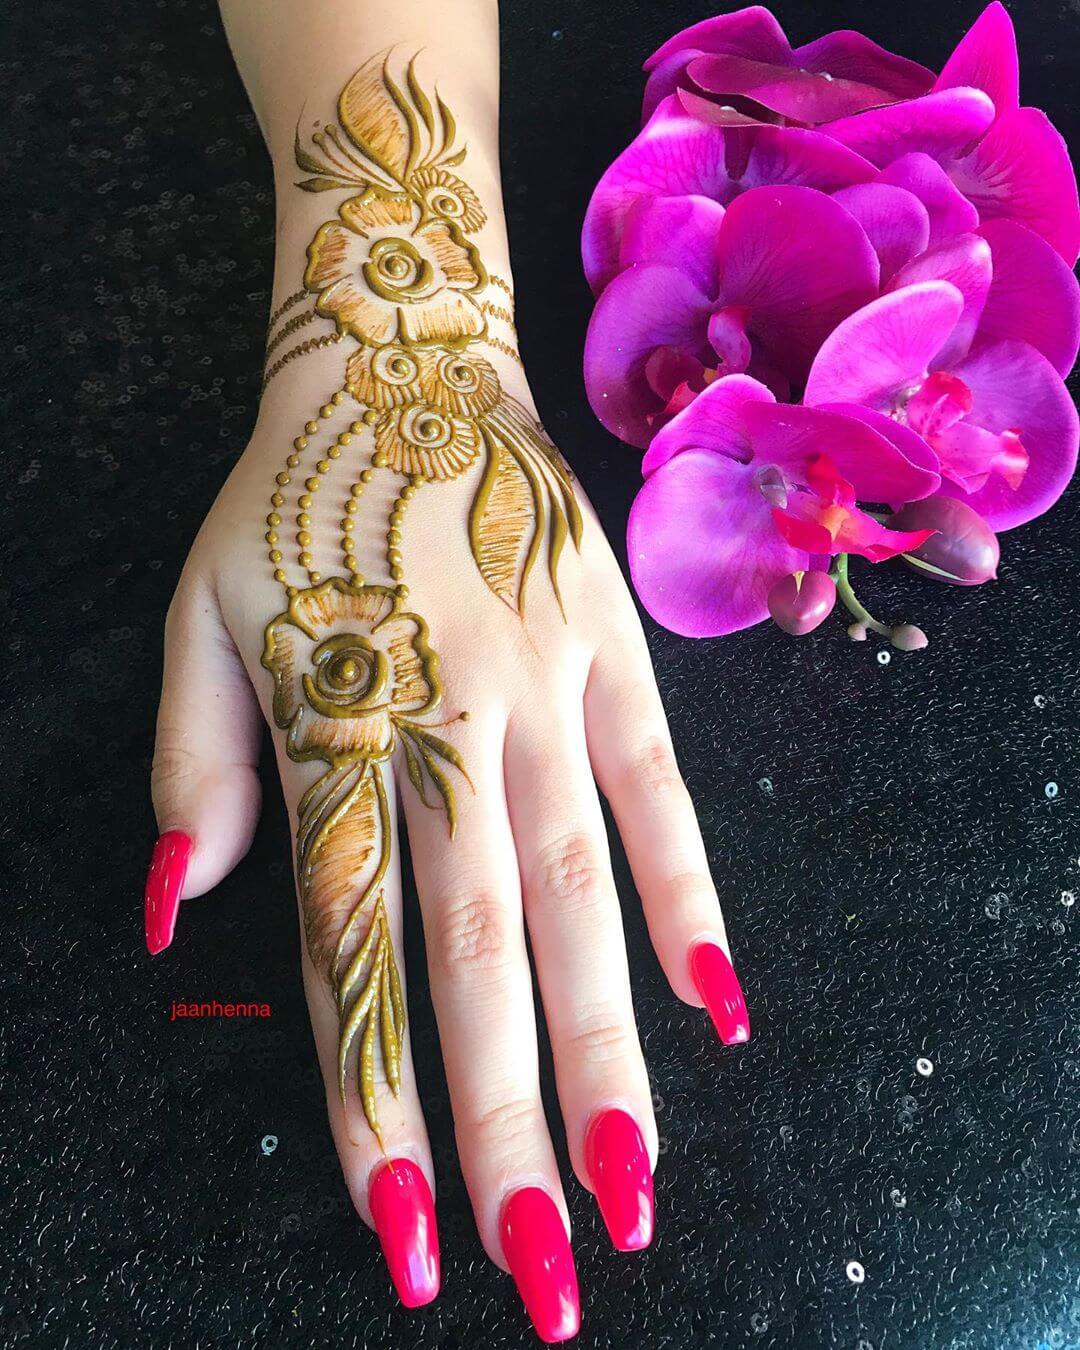 Sonia S Randhawa |📍TORONTO🇨🇦 on Instagram: “On a cold Sunday! 🥶 let's  play a game! - can you find … | Mehndi designs, Mehndi design images,  Latest henna designs